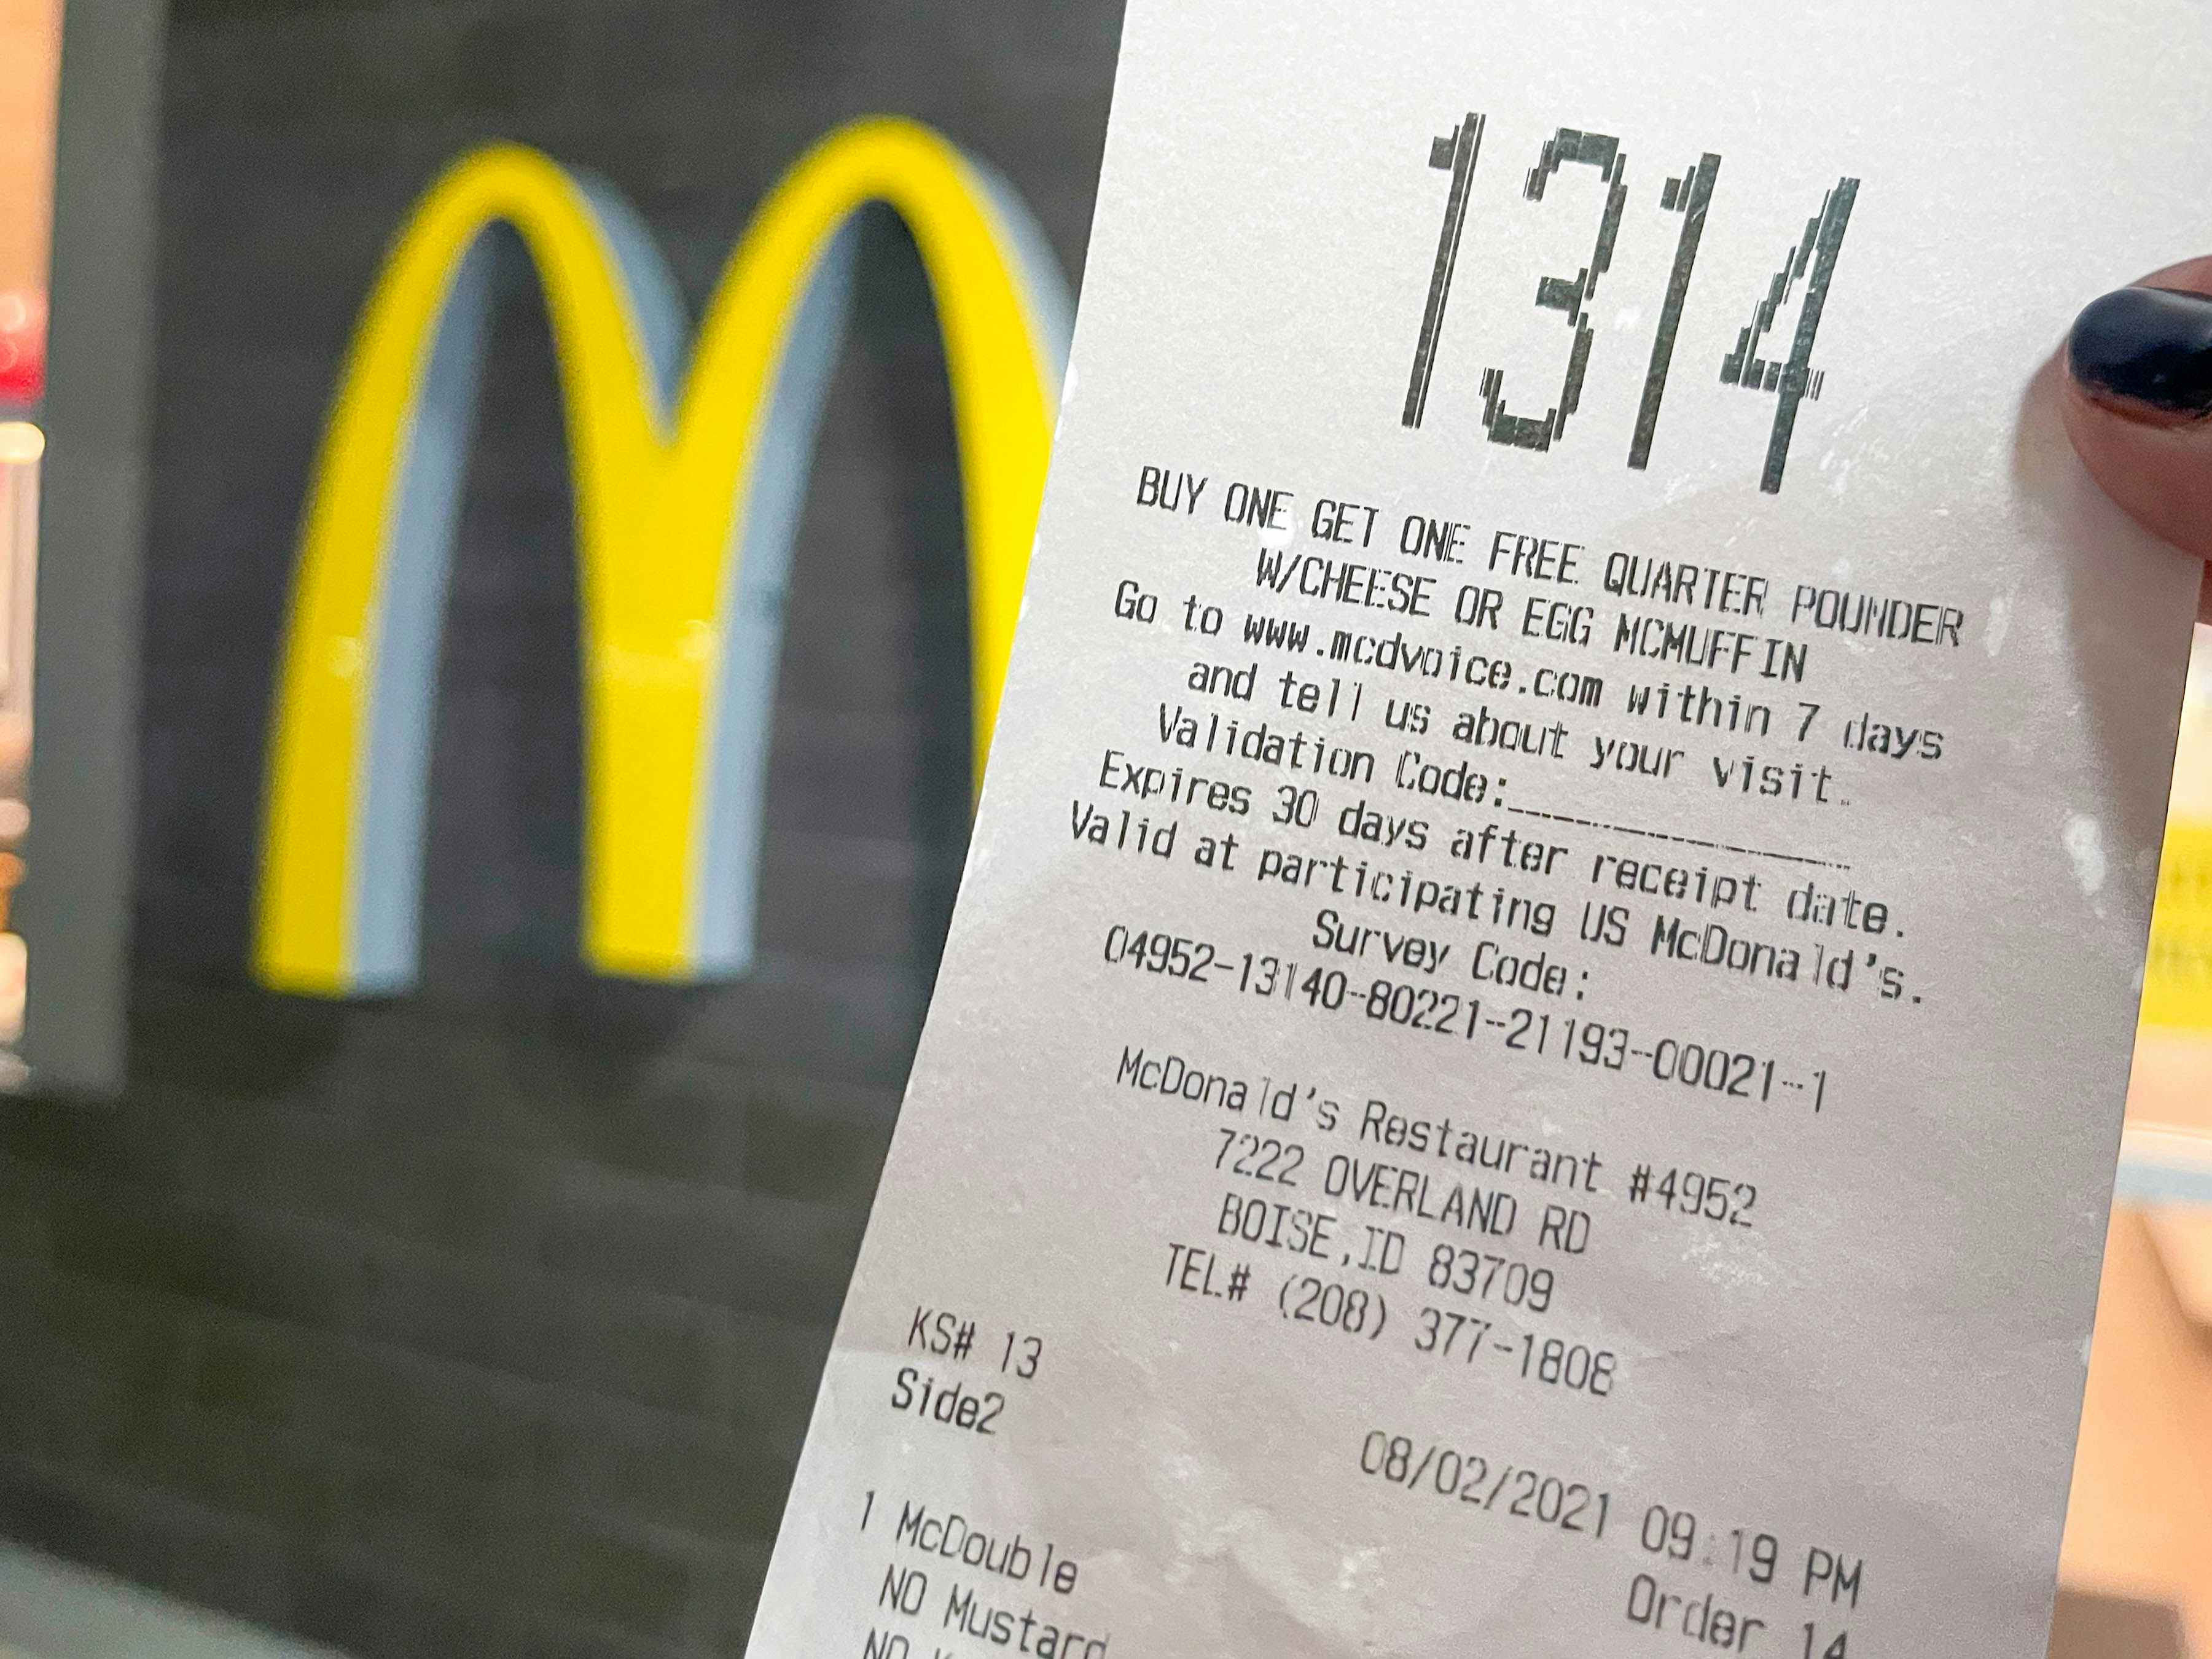 Teachers and School Employees in New York Can Get Free McDonald's